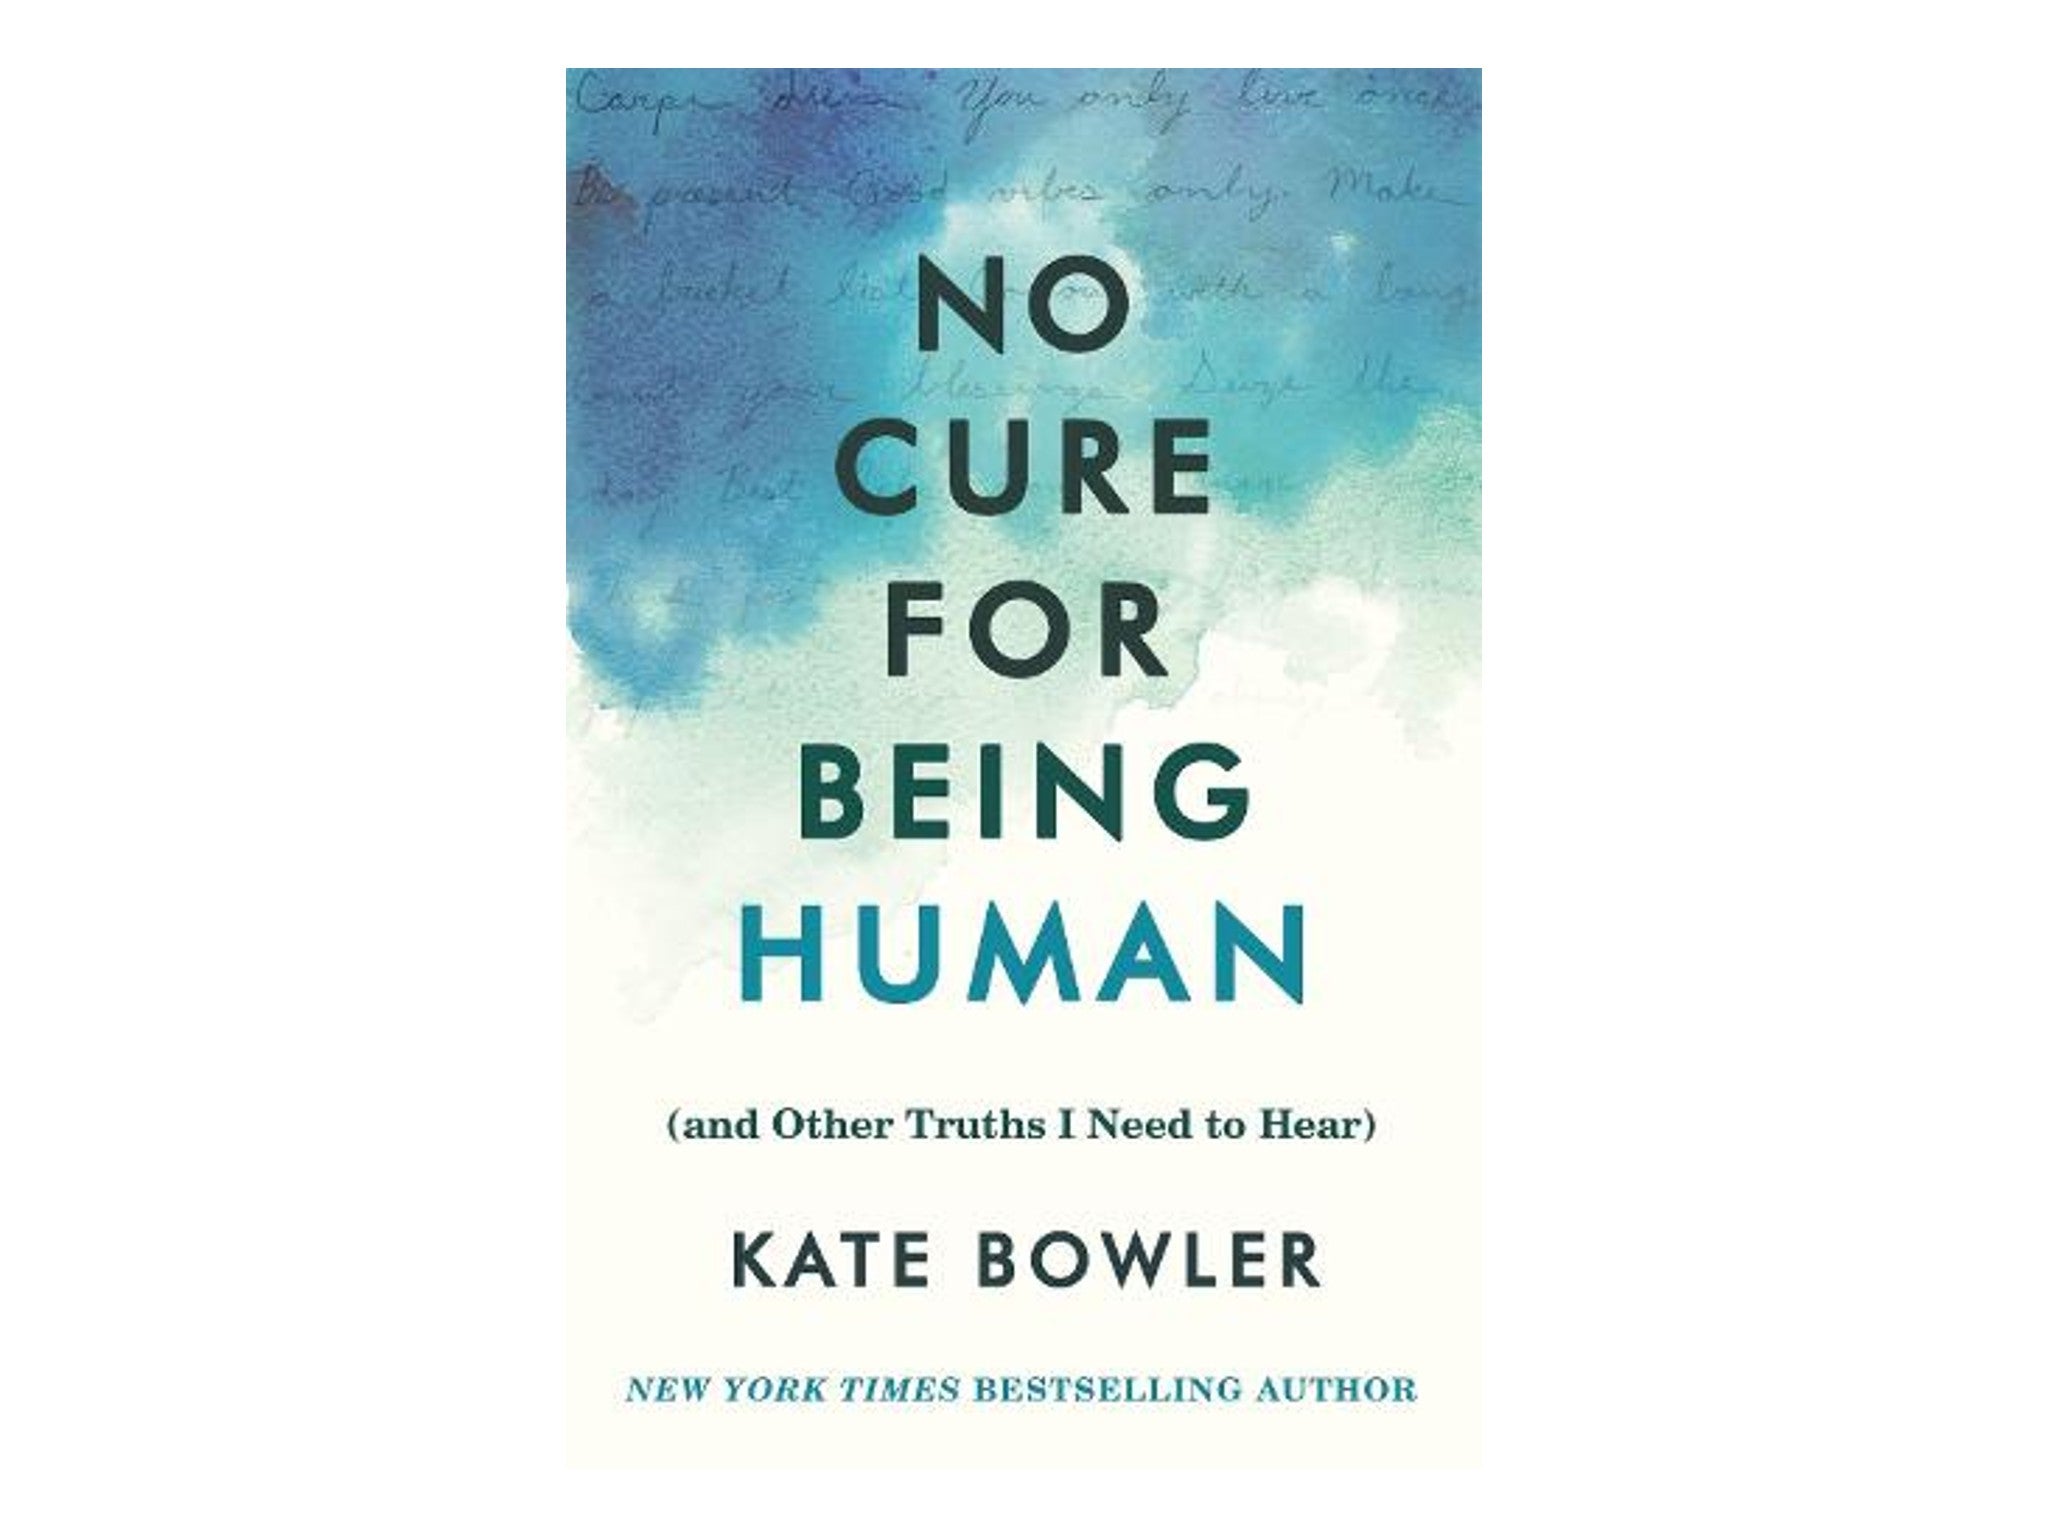  ‘No Cure For Being Human’ by Kate Bowler, published by Ebury indybest.jpg